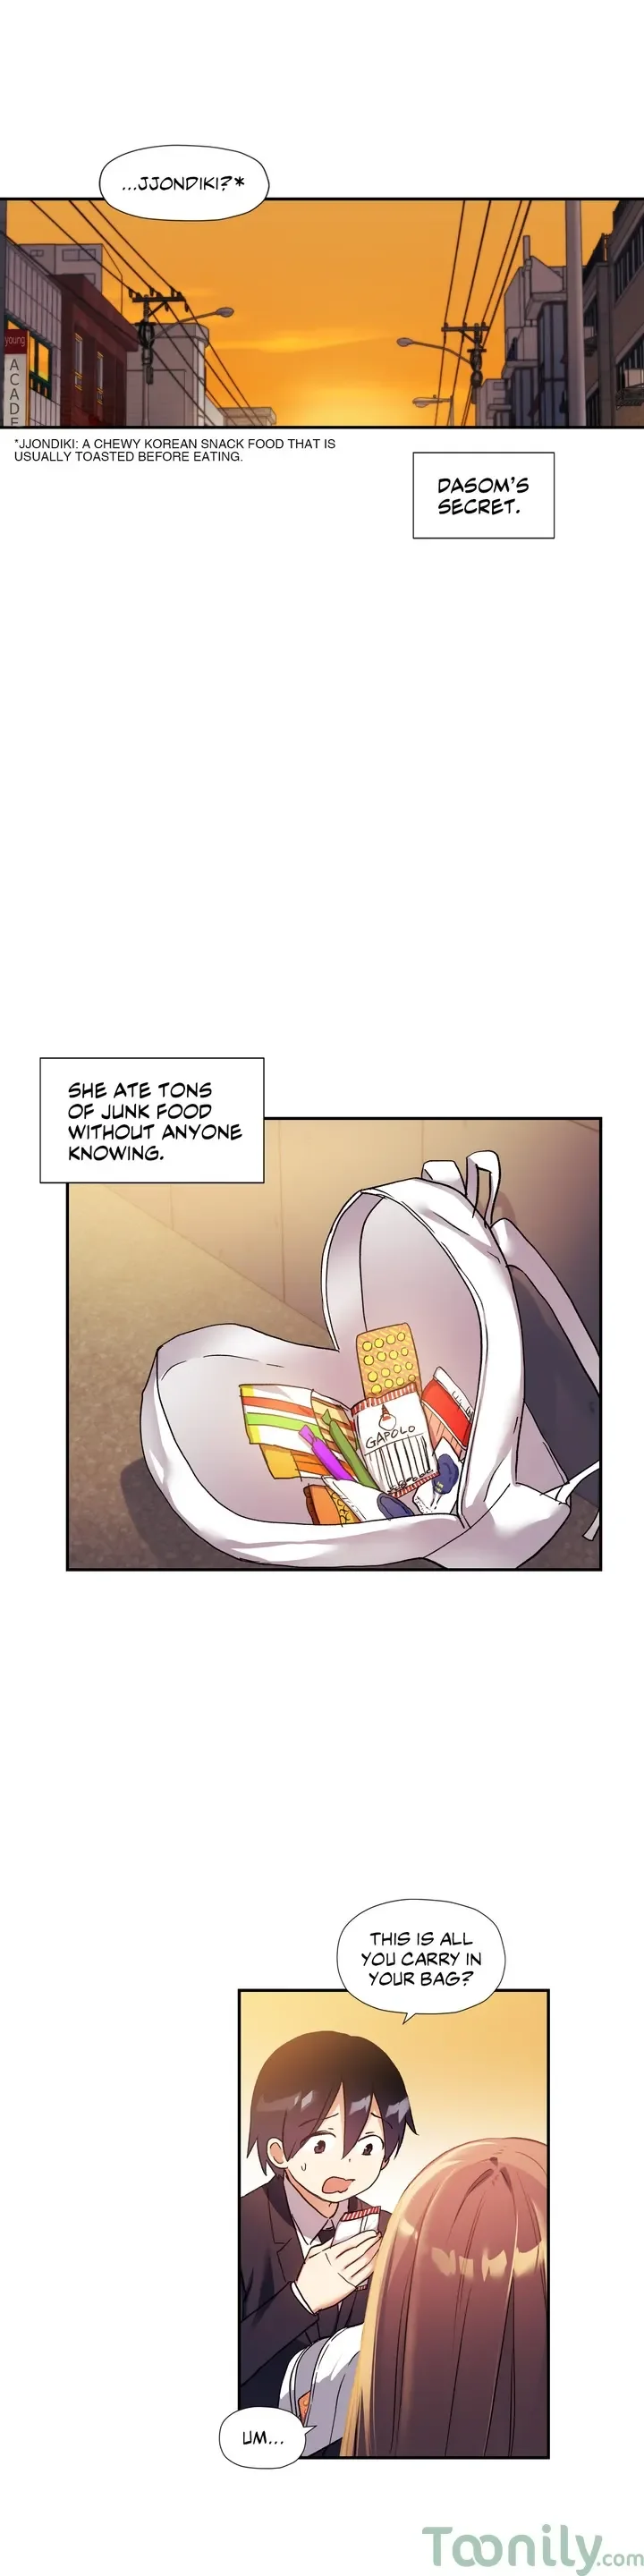 under-observation-my-first-loves-and-i-chap-30-17